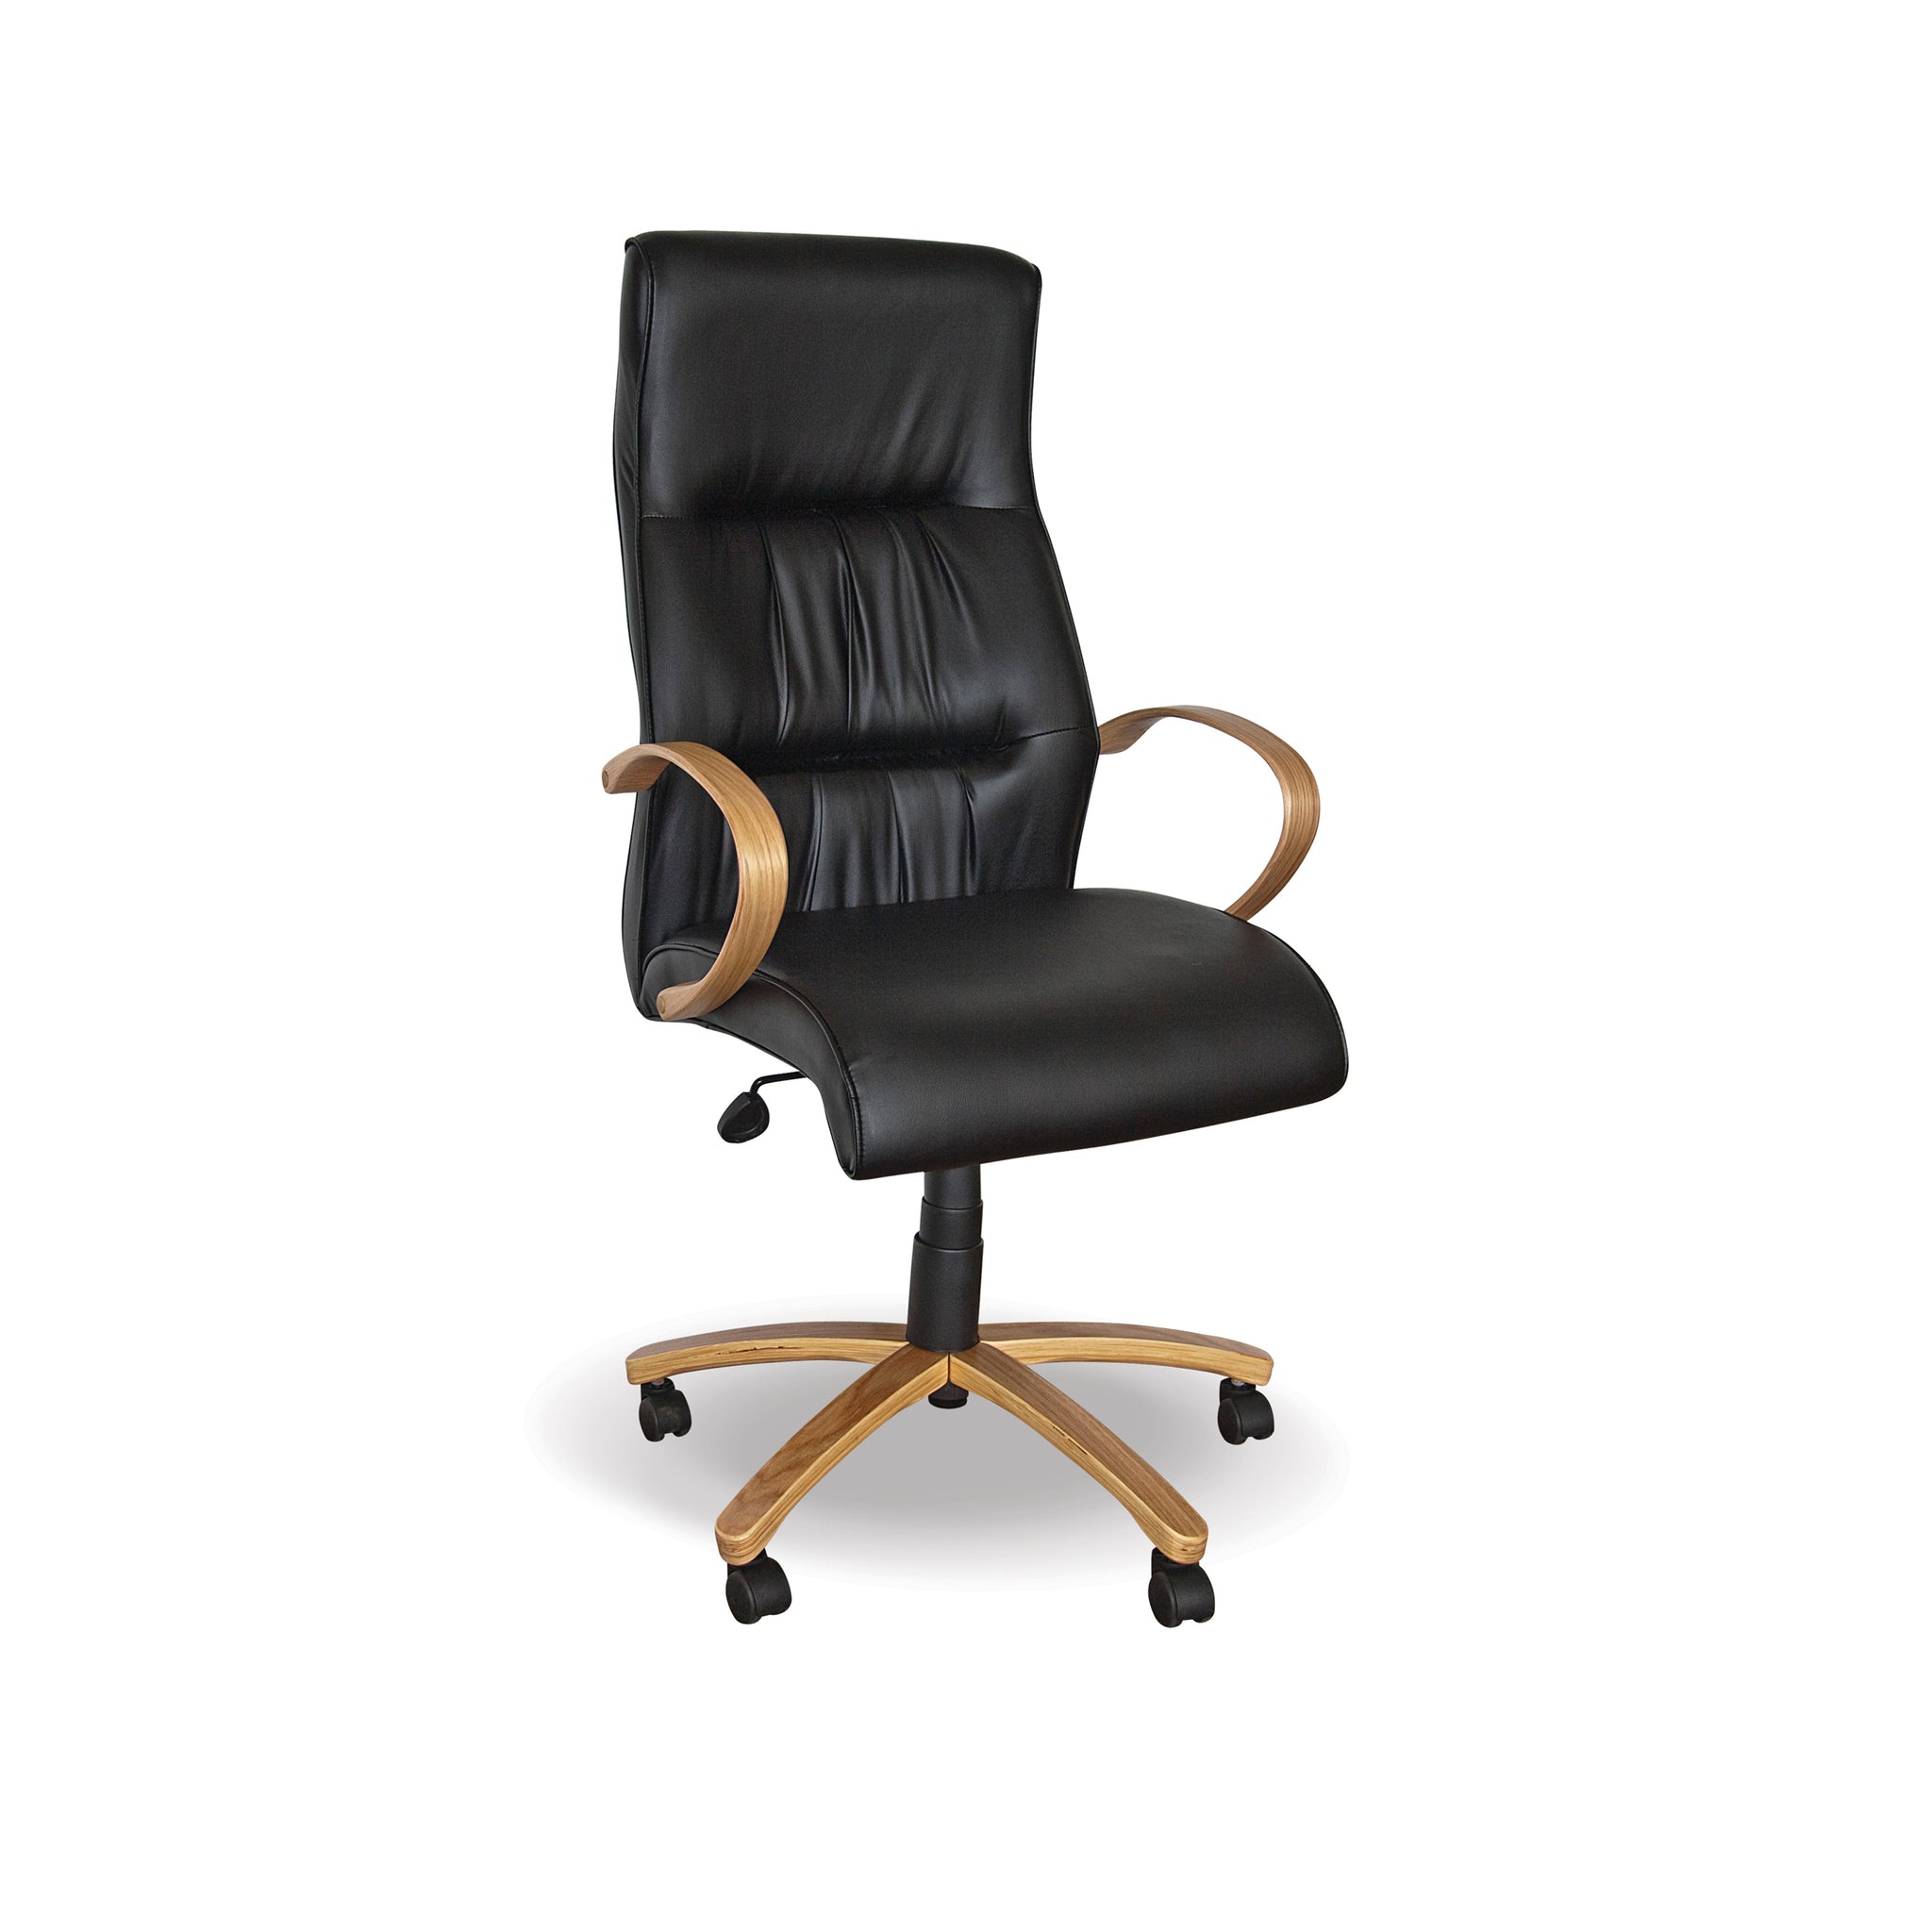 Hedcor Salvador high back office chair